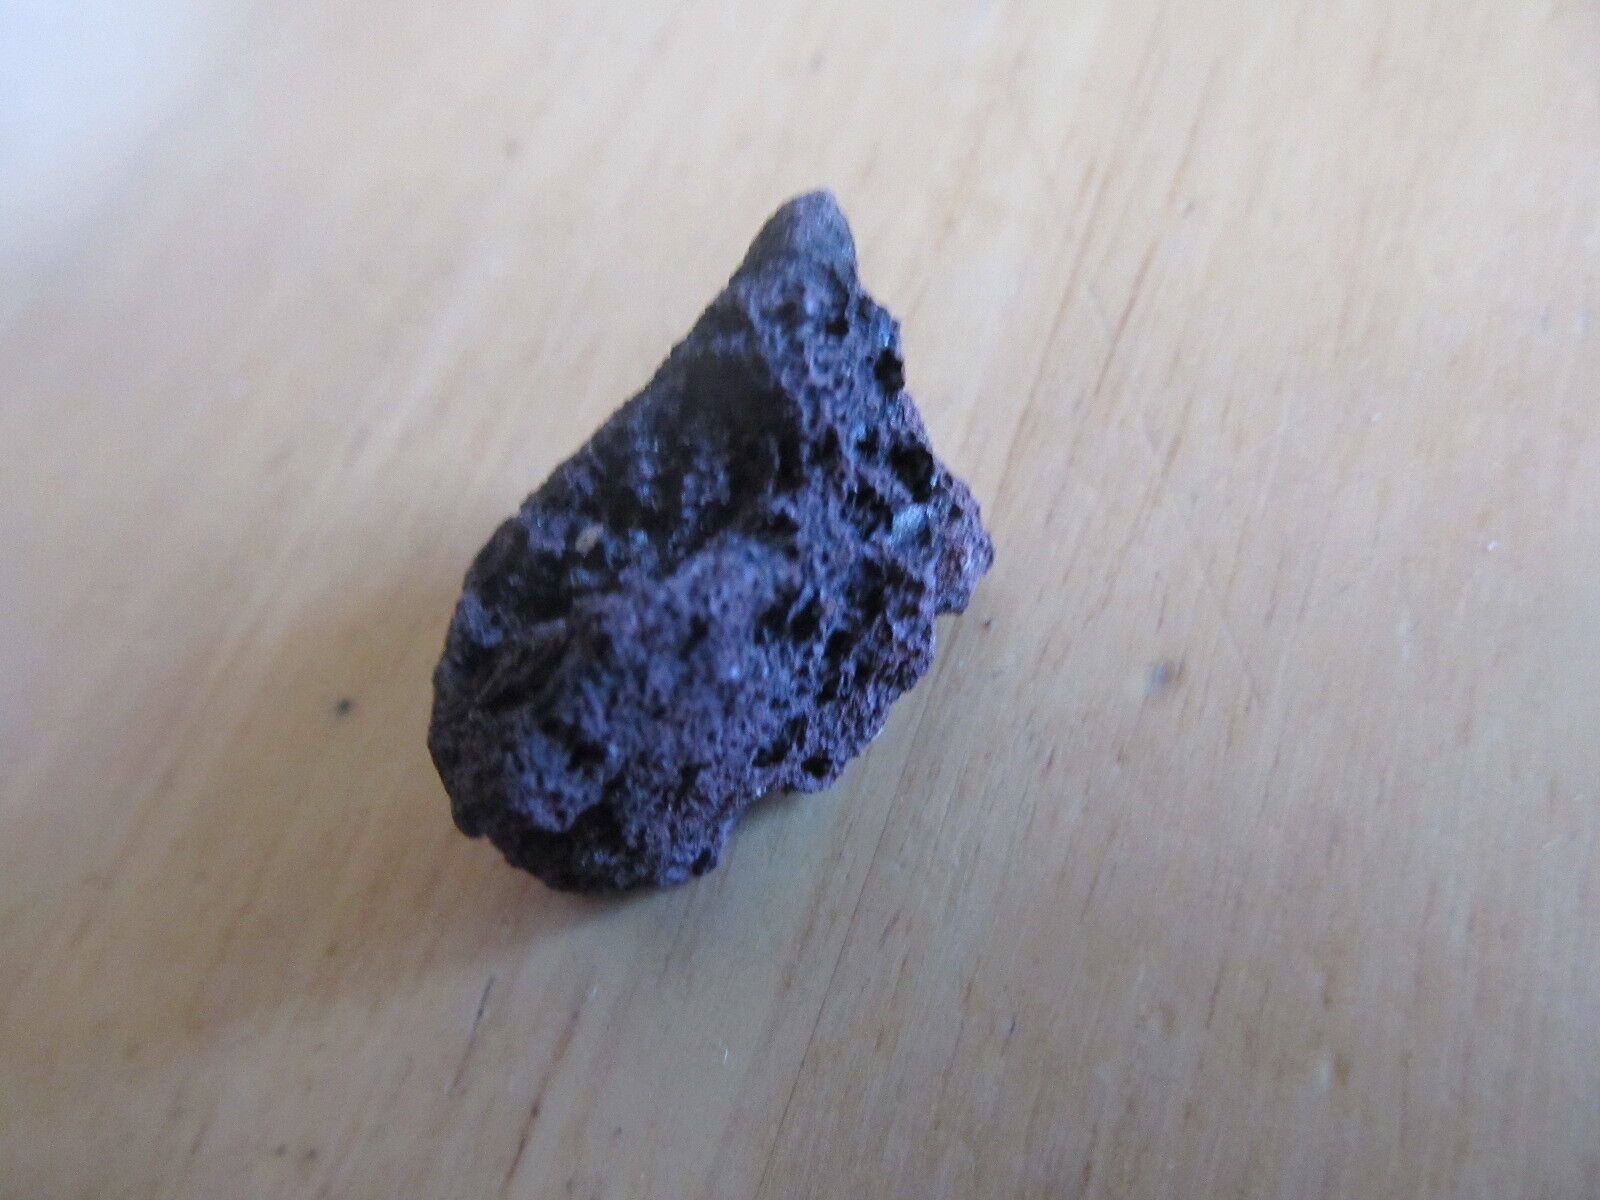 Very Old Piece of LAVA / Volcanic Rock From Mt. FUJI VOLCANO, Tokyo Japan,  Gift